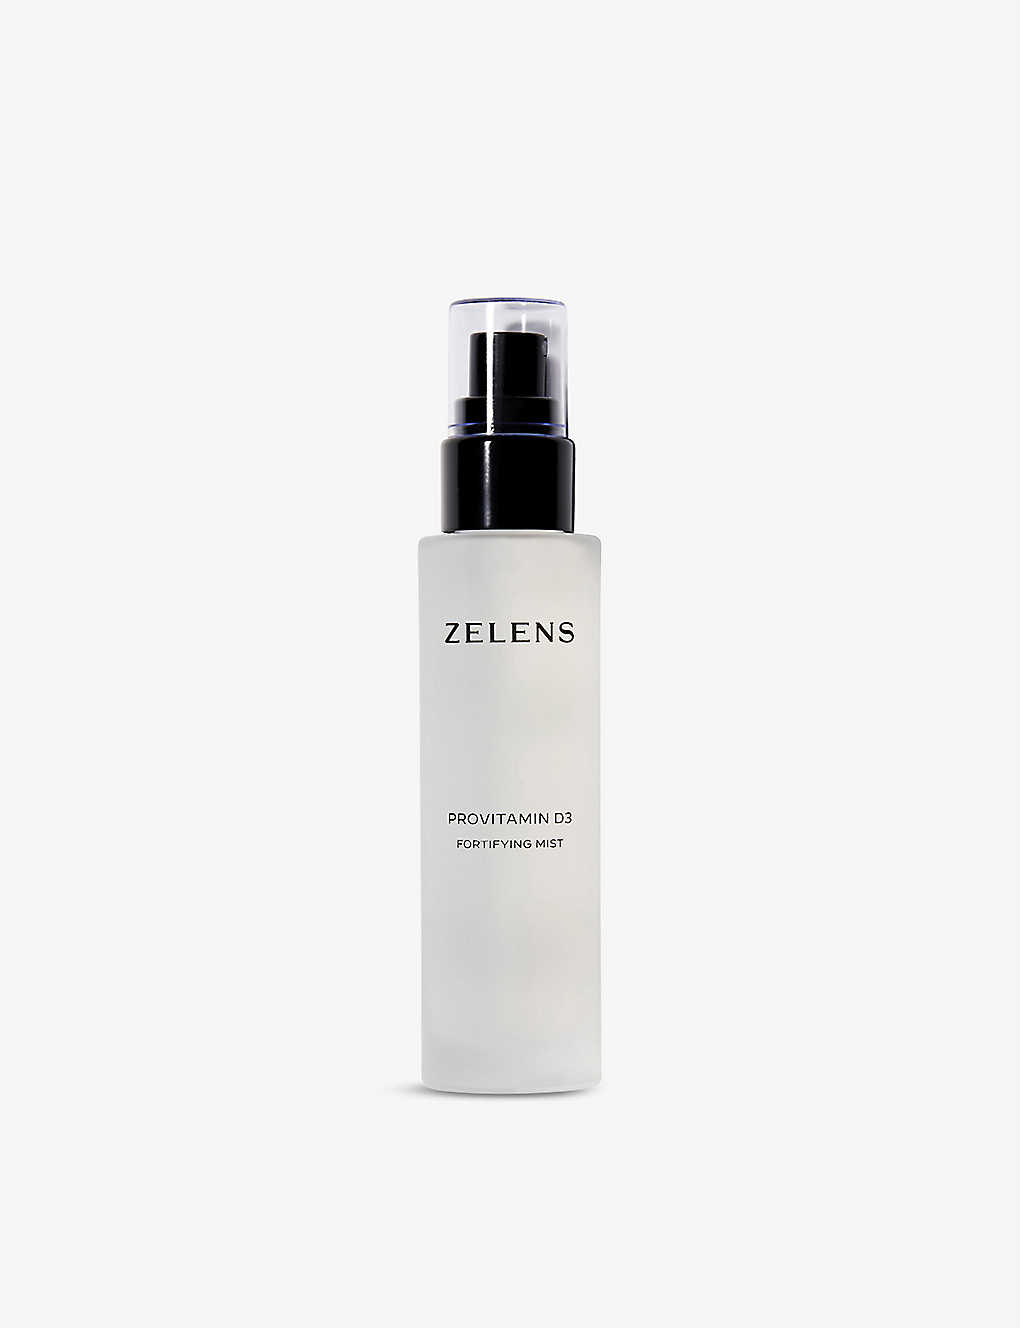 Zelens Provitamin D3 Fortifying Mist, 50ml In Colorless